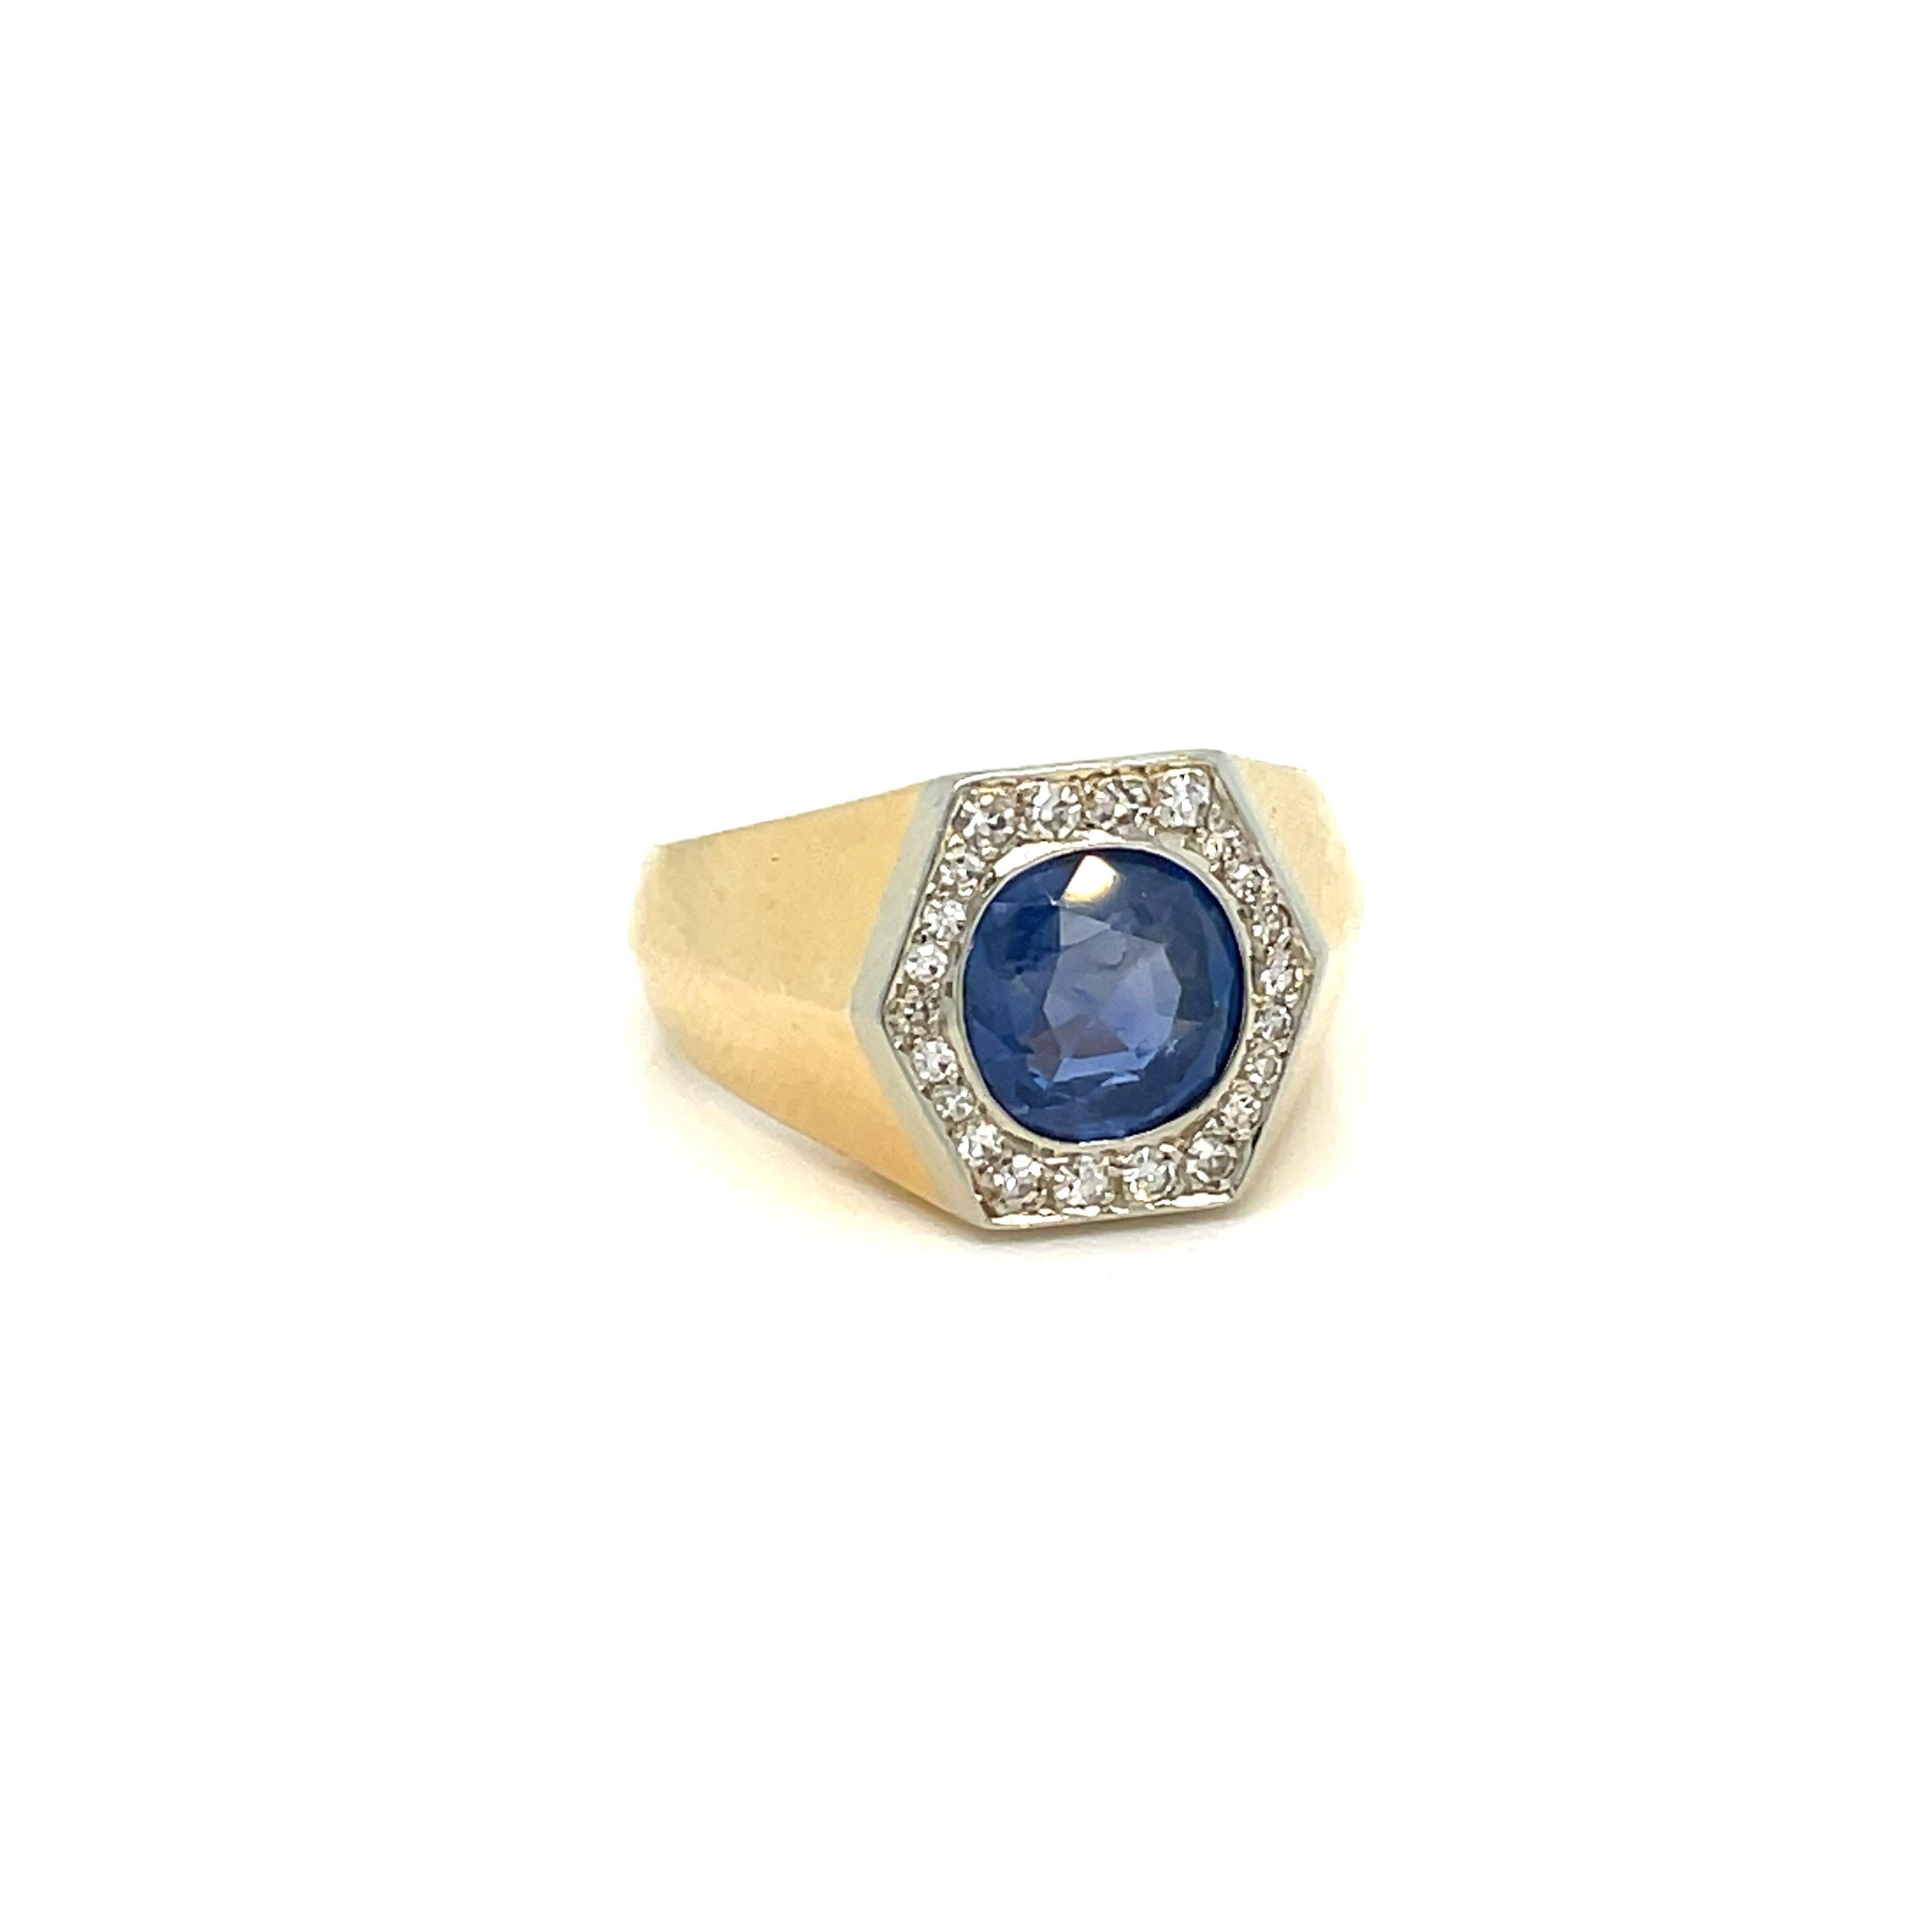 An exquisite genuine Art Deco ring handcrafted in Platinum & Yellow gold by master jewelers, featuring a beautiful vivid 2.50 carat Unheated untreated Natural Ceylon Sapphire cushion-shape, surrounded by 0.50 carats of old cut diamonds.

The